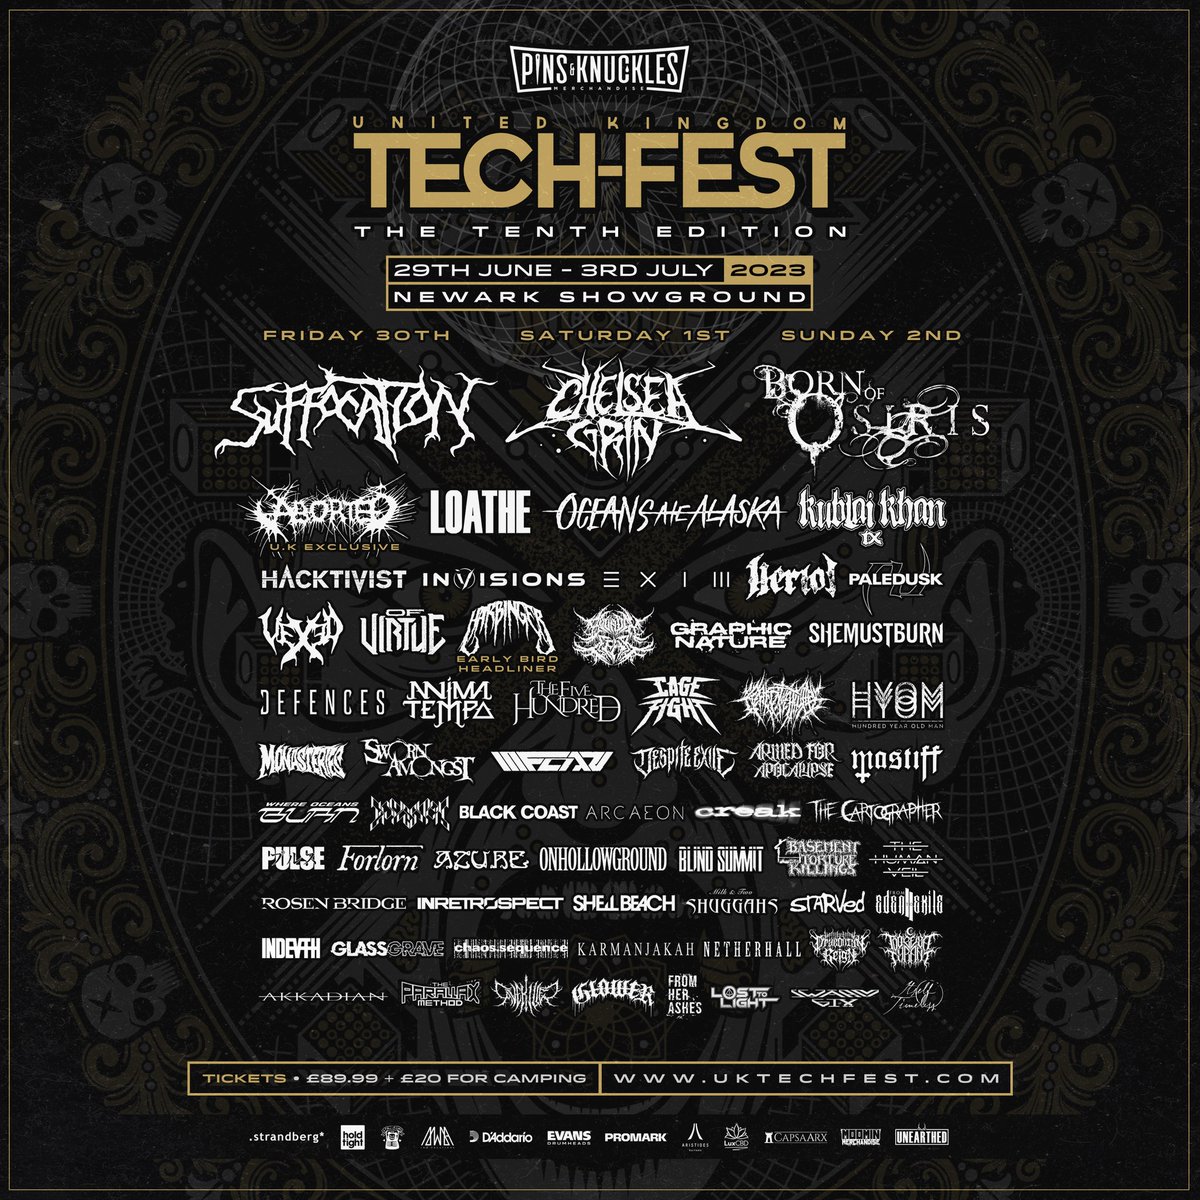 So who are we going to see at @UKTechFest this year? Crazy lineup featuring @suffocation , @abortedmetal , @loatheasone @bornofosiris4 and countless other sick bands #uktechfest #crepitation